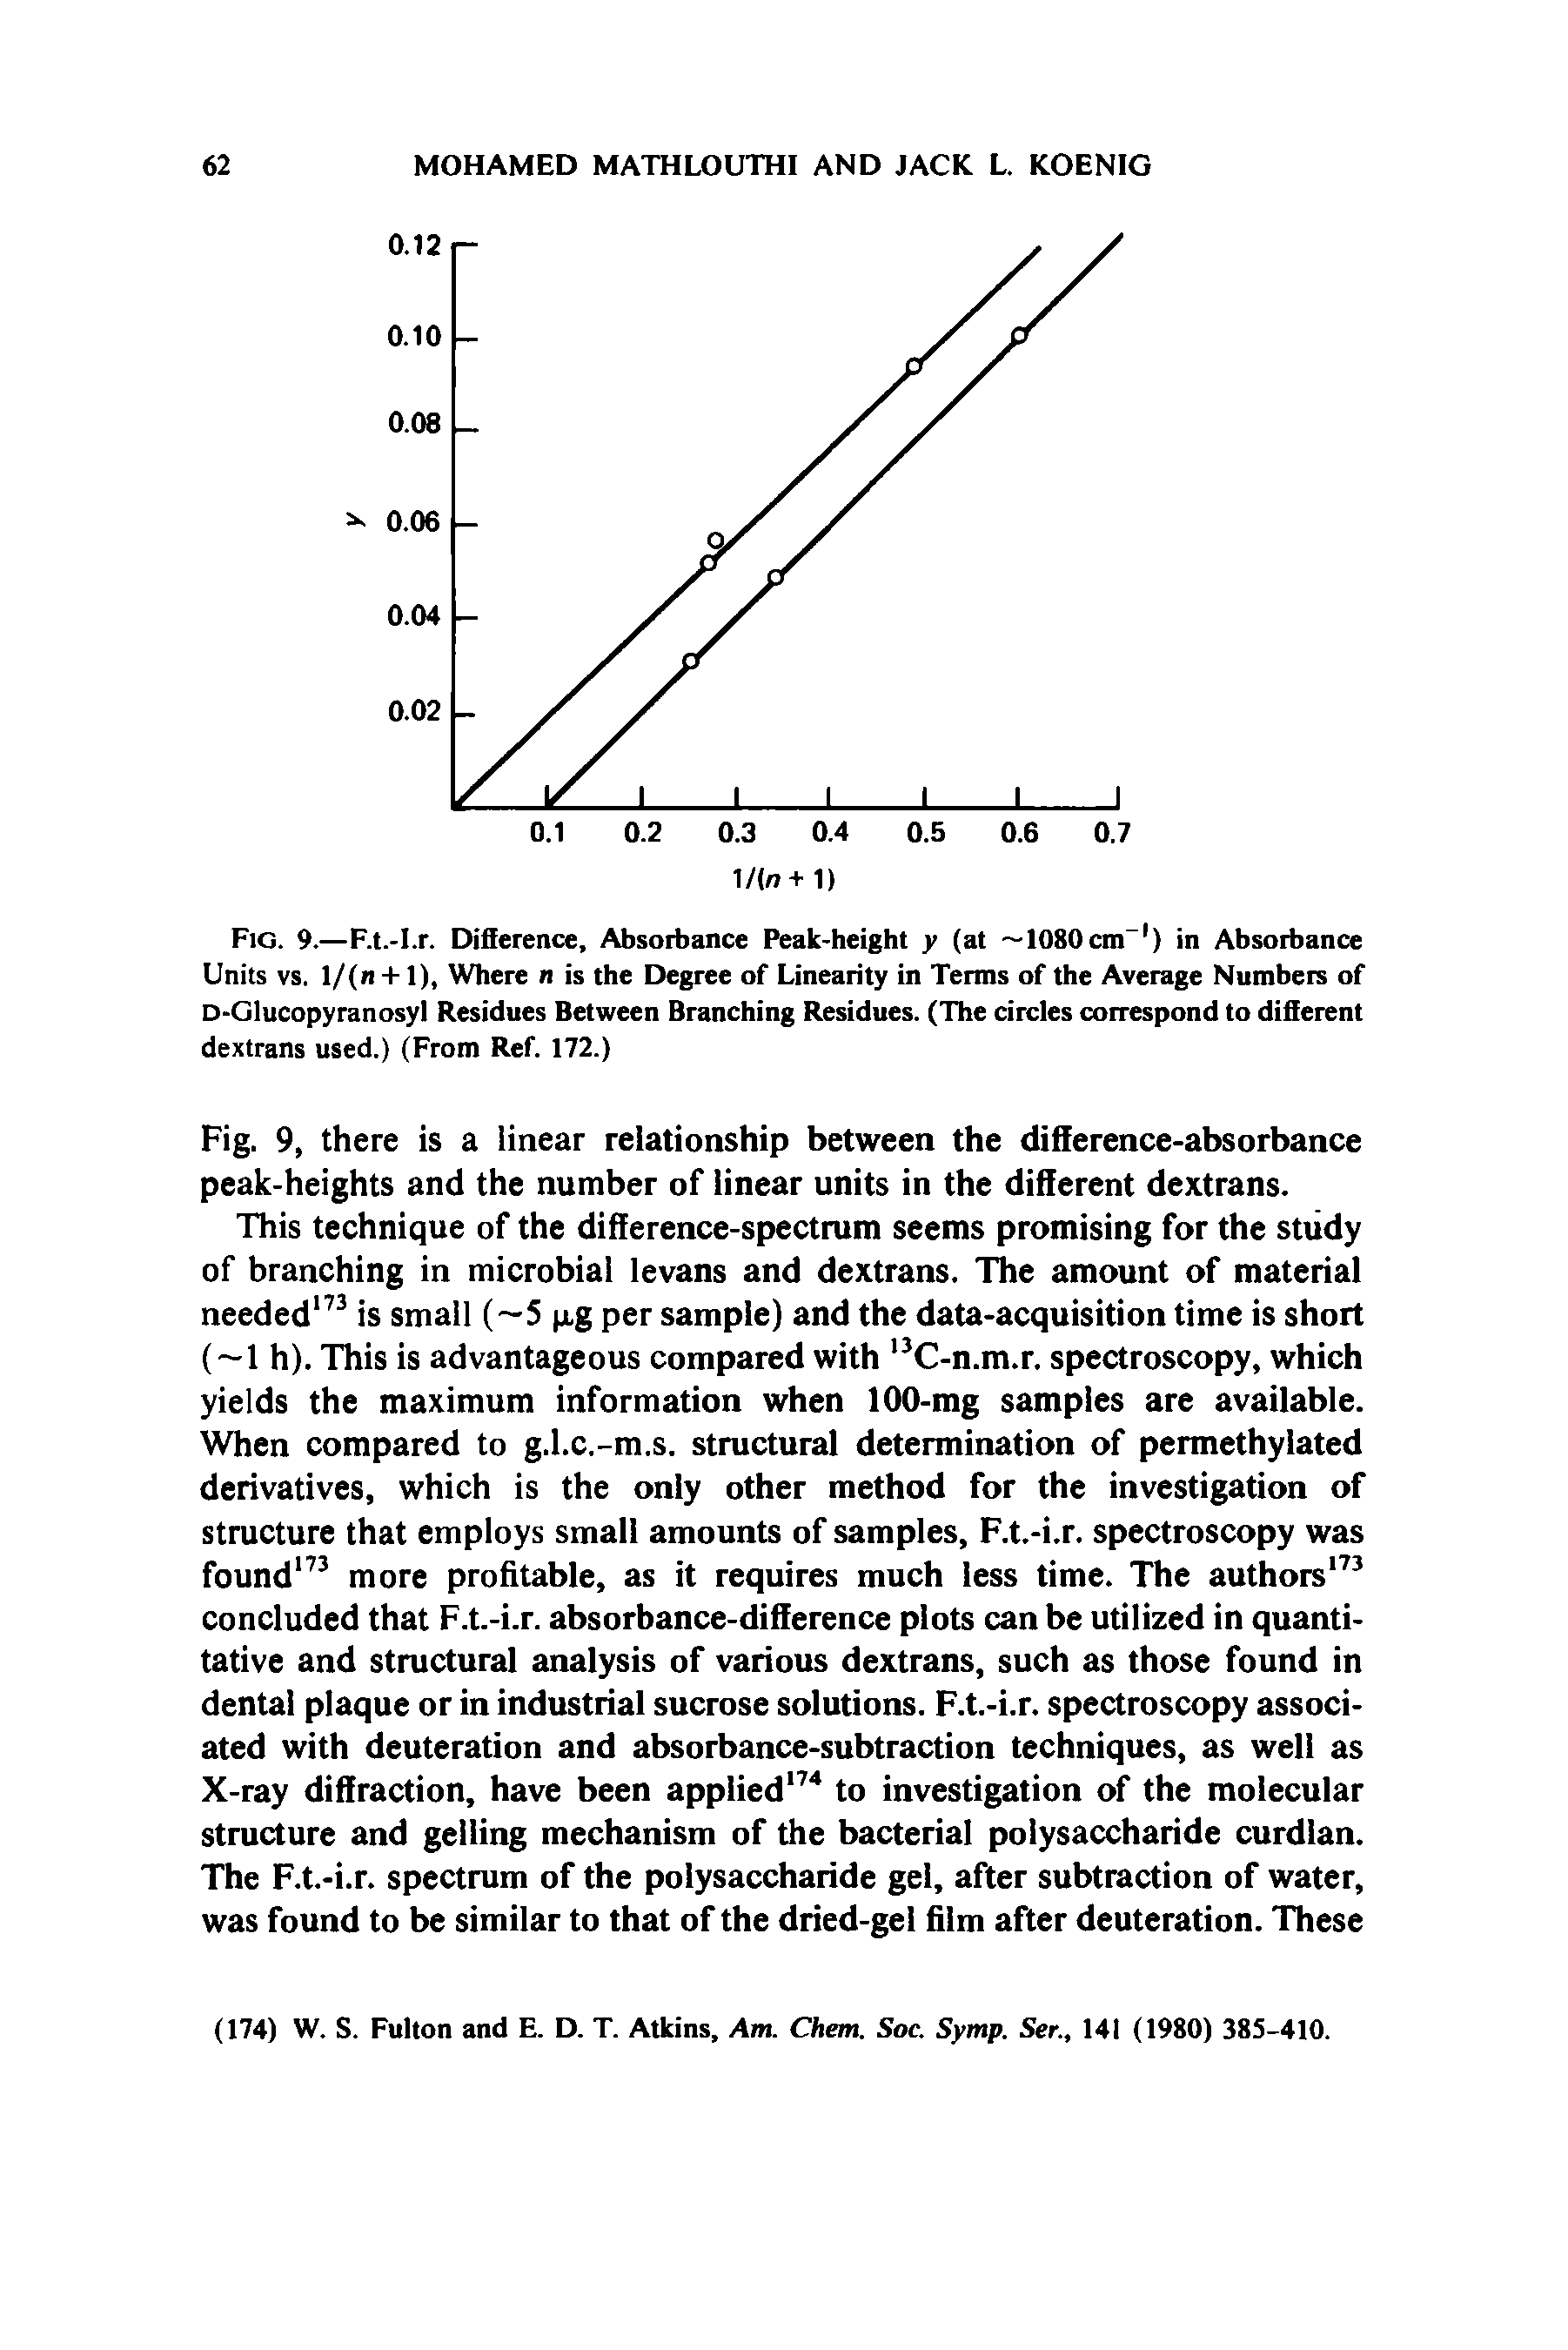 Fig. 9.—F.t.-I.r. Difference, Absorbance Peak-height y (at 1080 cm-1) in Absorbance Units vs. l/(n +1), Where n is the Degree of Linearity in Terms of the Average Numbers of D-Glucopyranosyl Residues Between Branching Residues. (The circles correspond to different dextrans used.) (From Ref. 172.)...